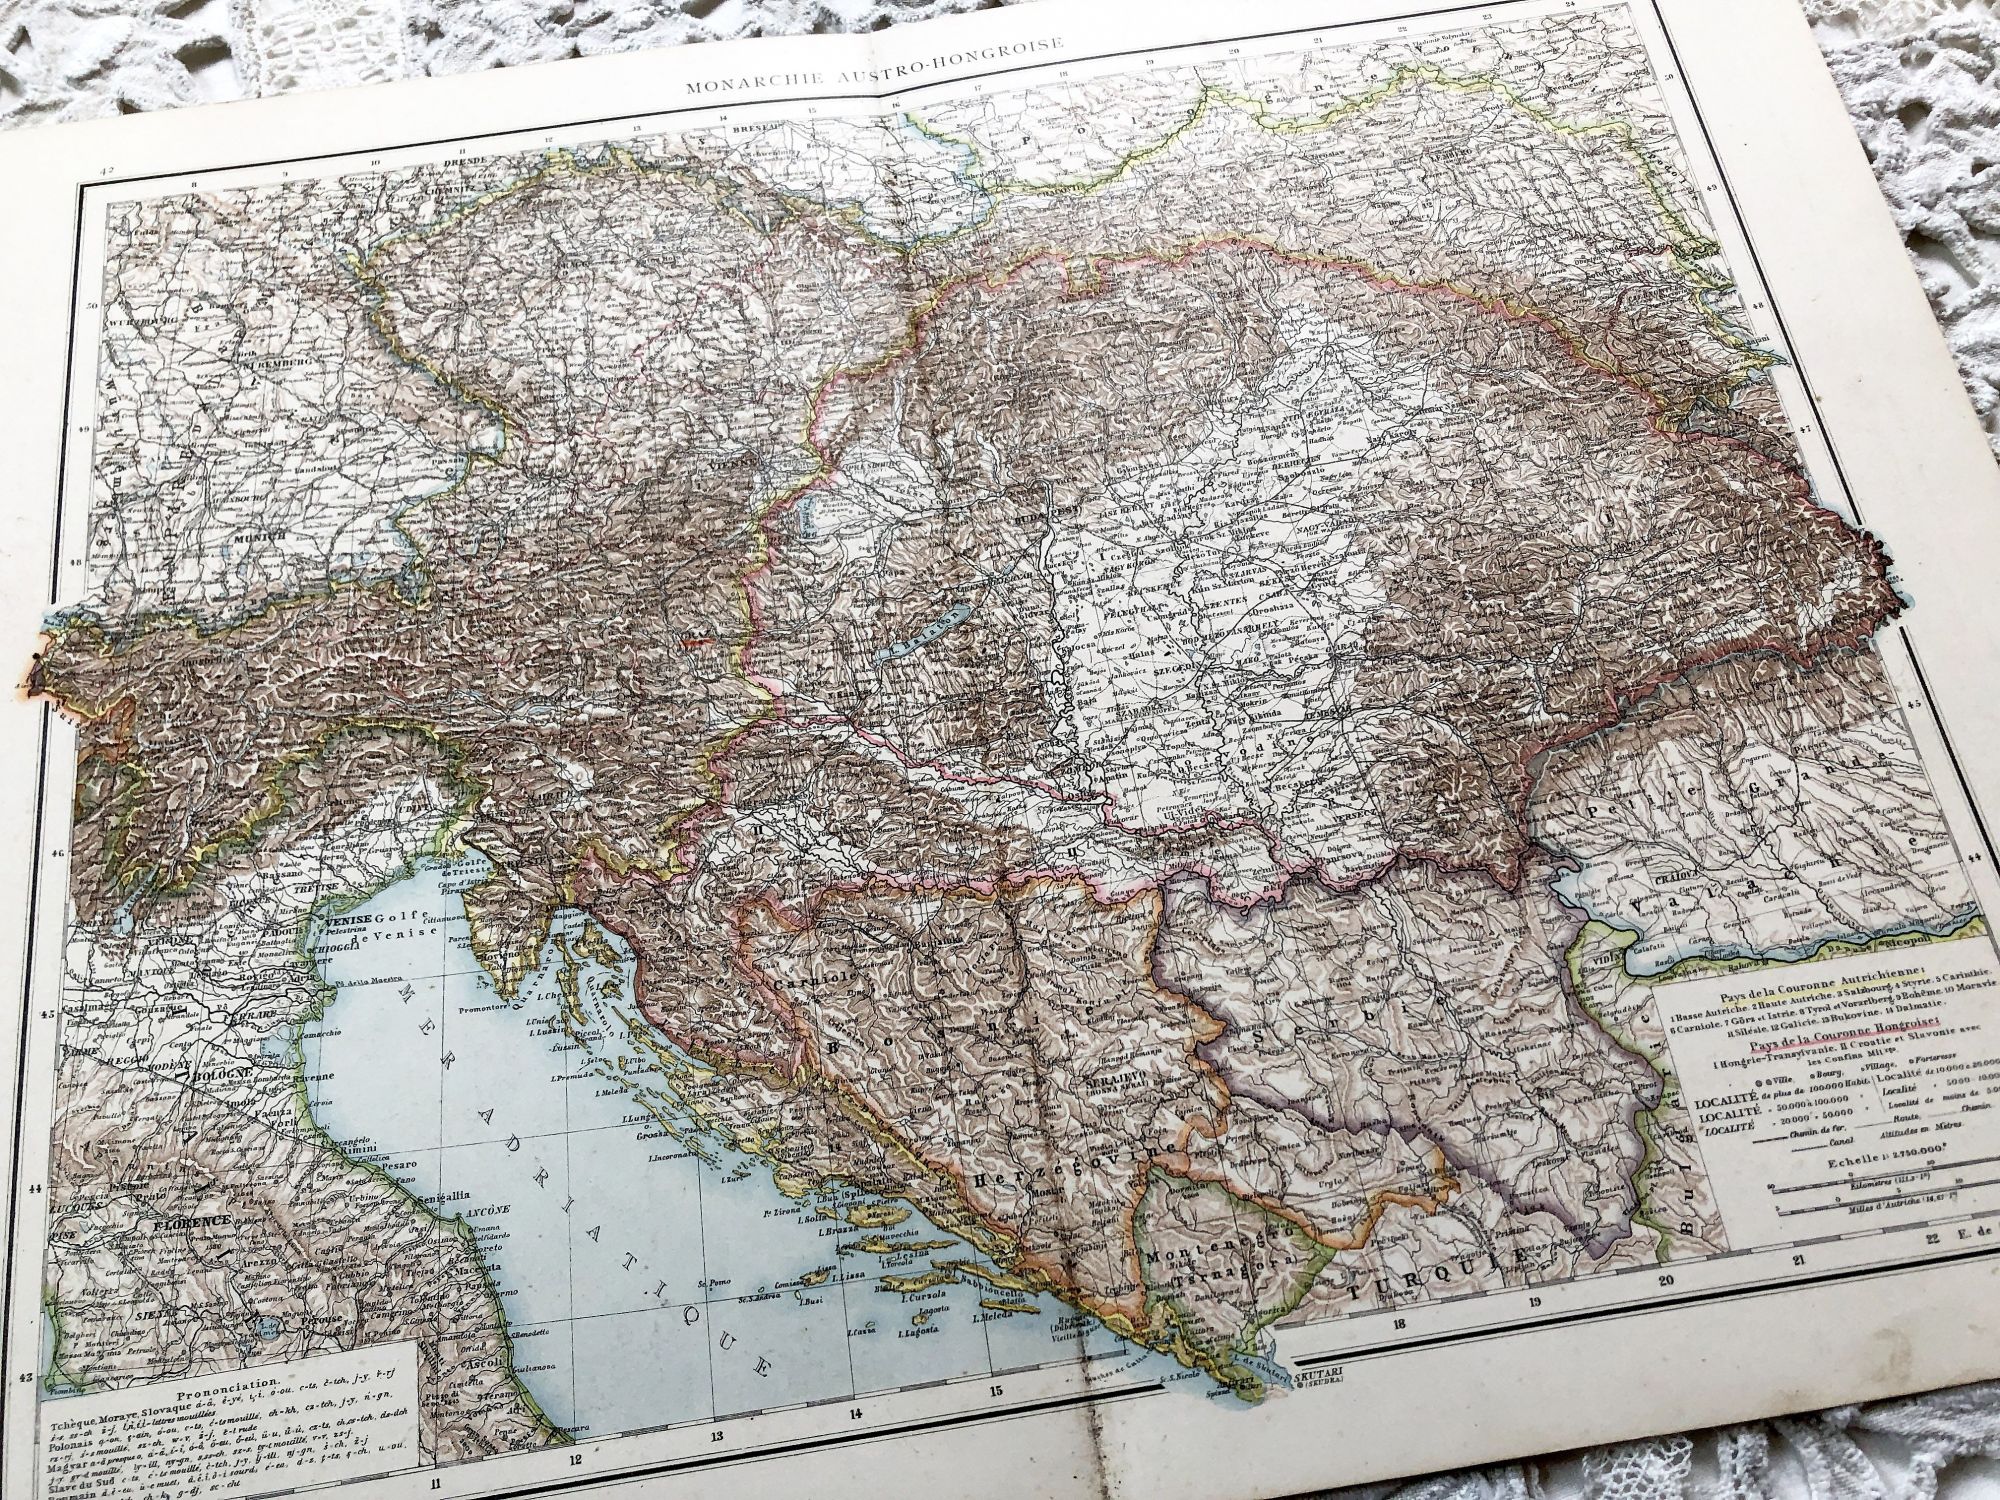 Huge vintage map of of the Austro-Hungarian monarchy (Hungary, Czech Republic, Austria, etc.) from a French atlas of the 1910s